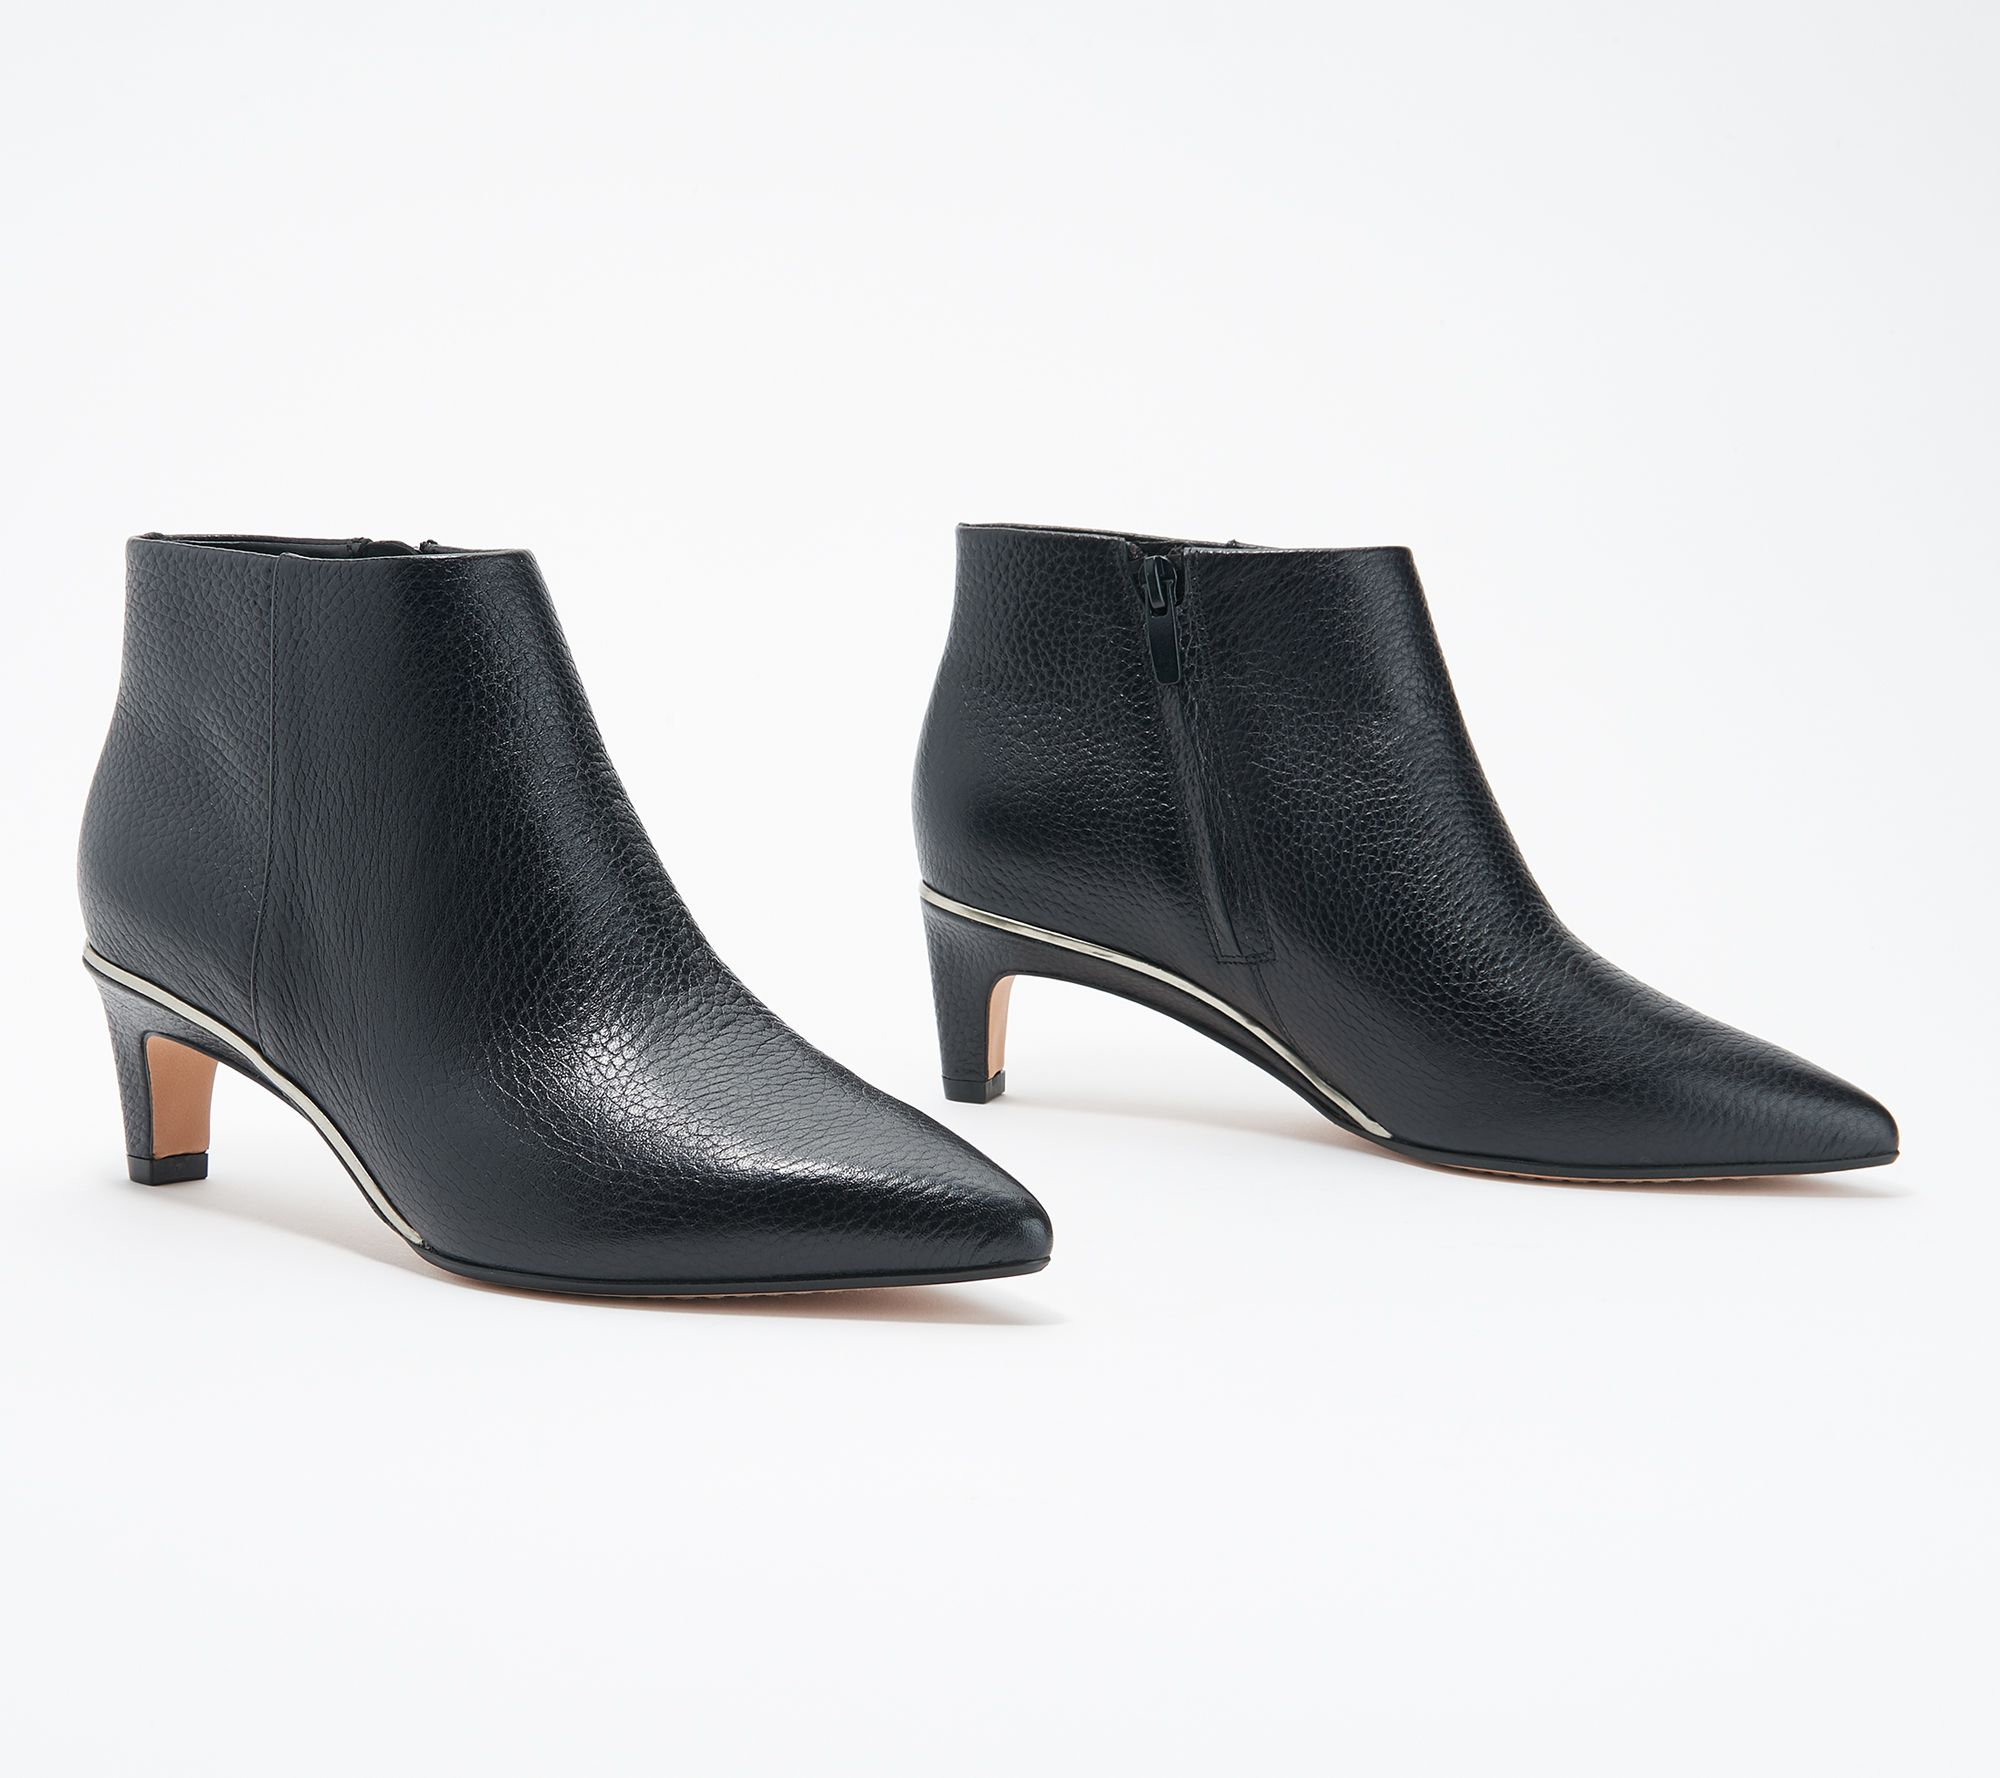 Clarks Leather Heeled Dress Booties 